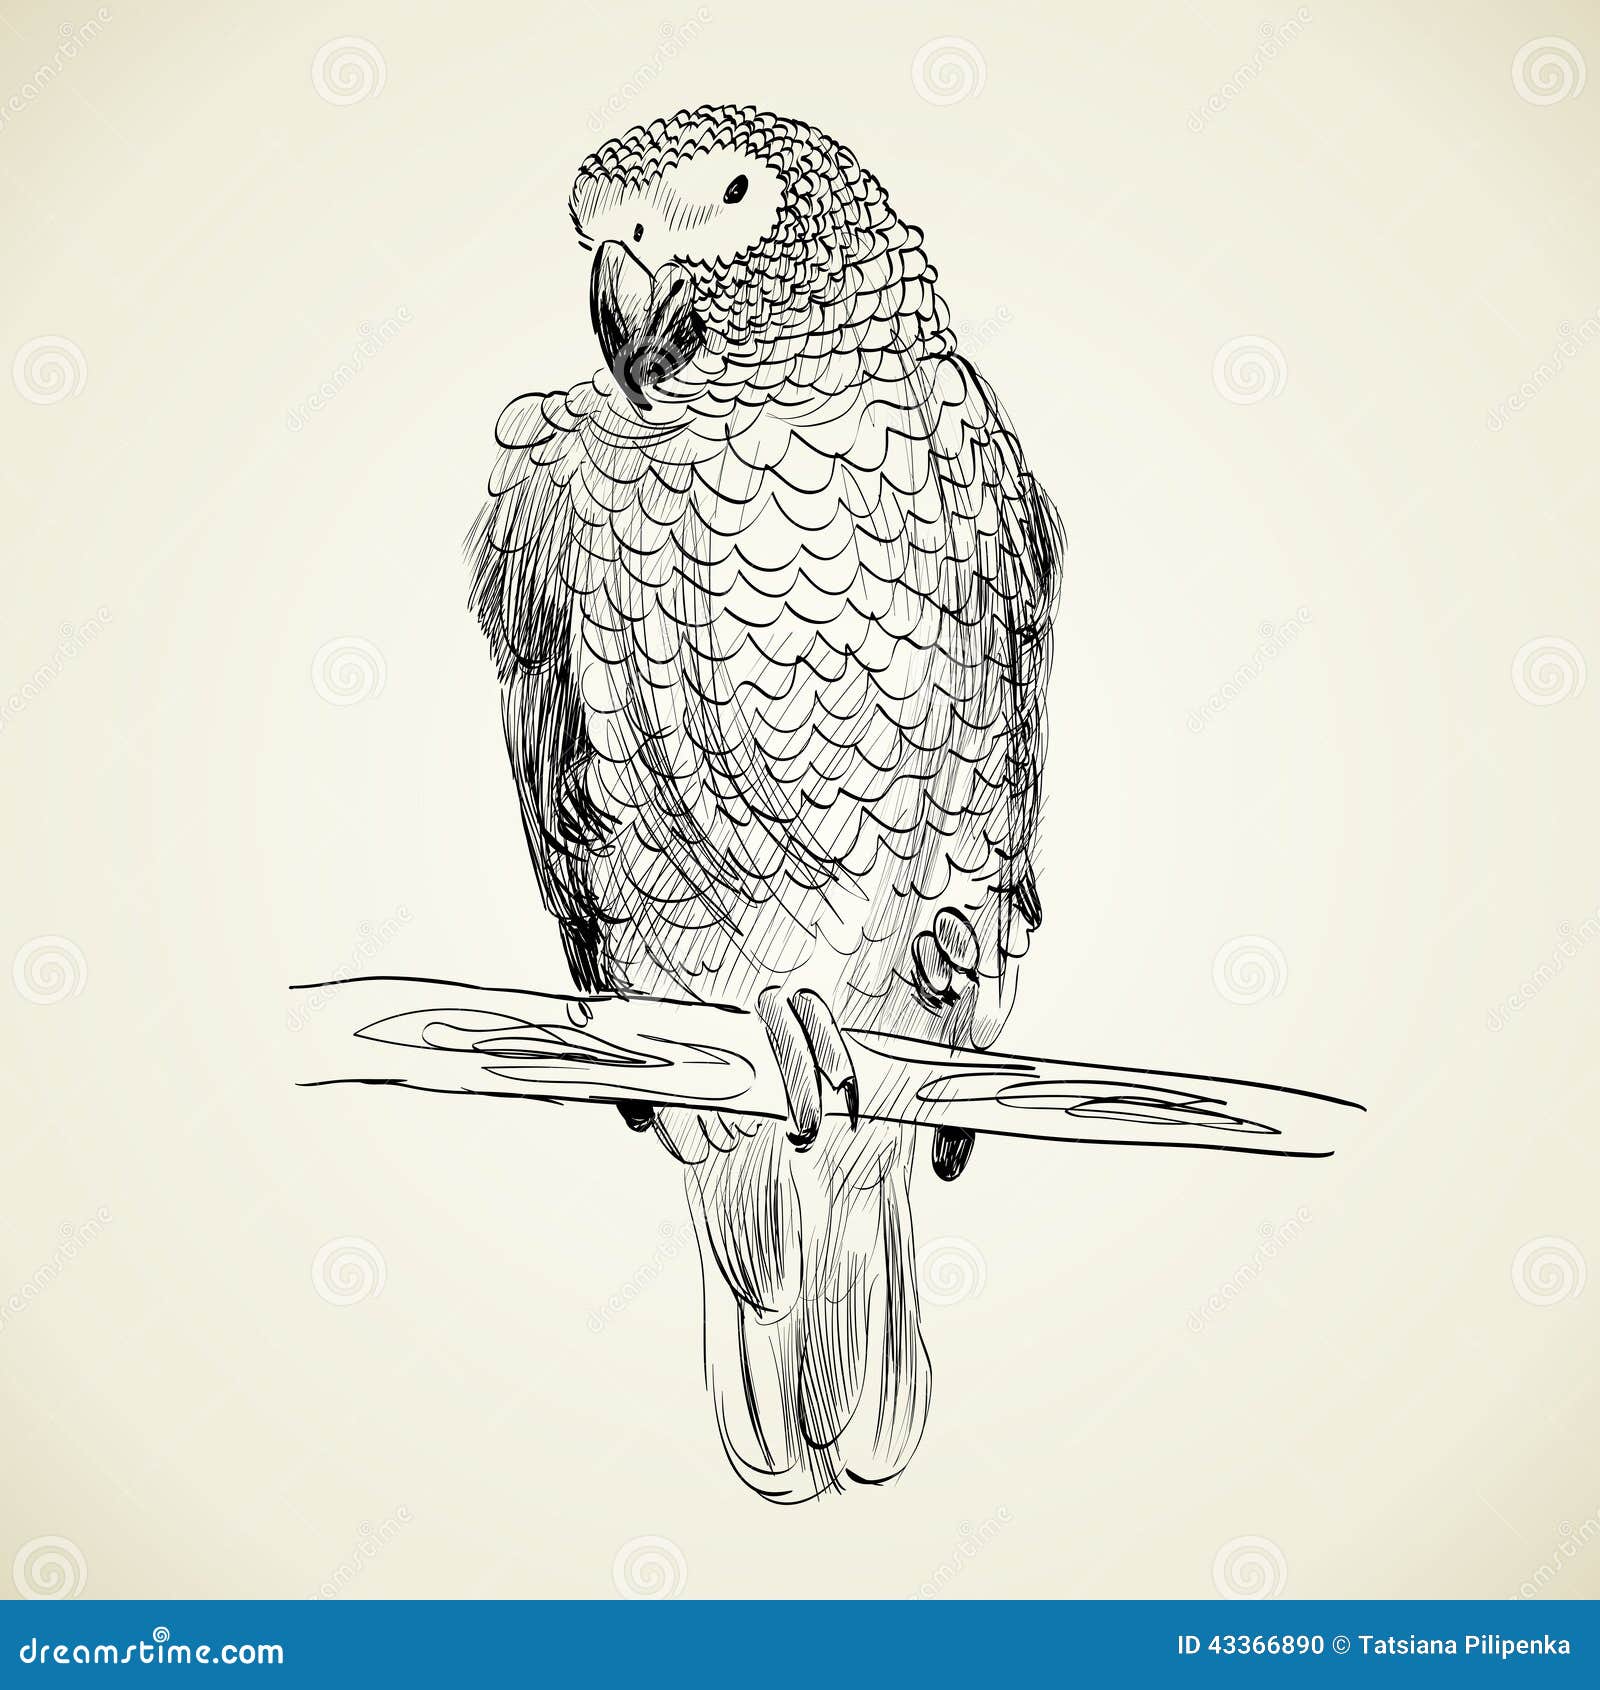 Parrot stock vector. Illustration of nature, sketch, pattern - 43366890